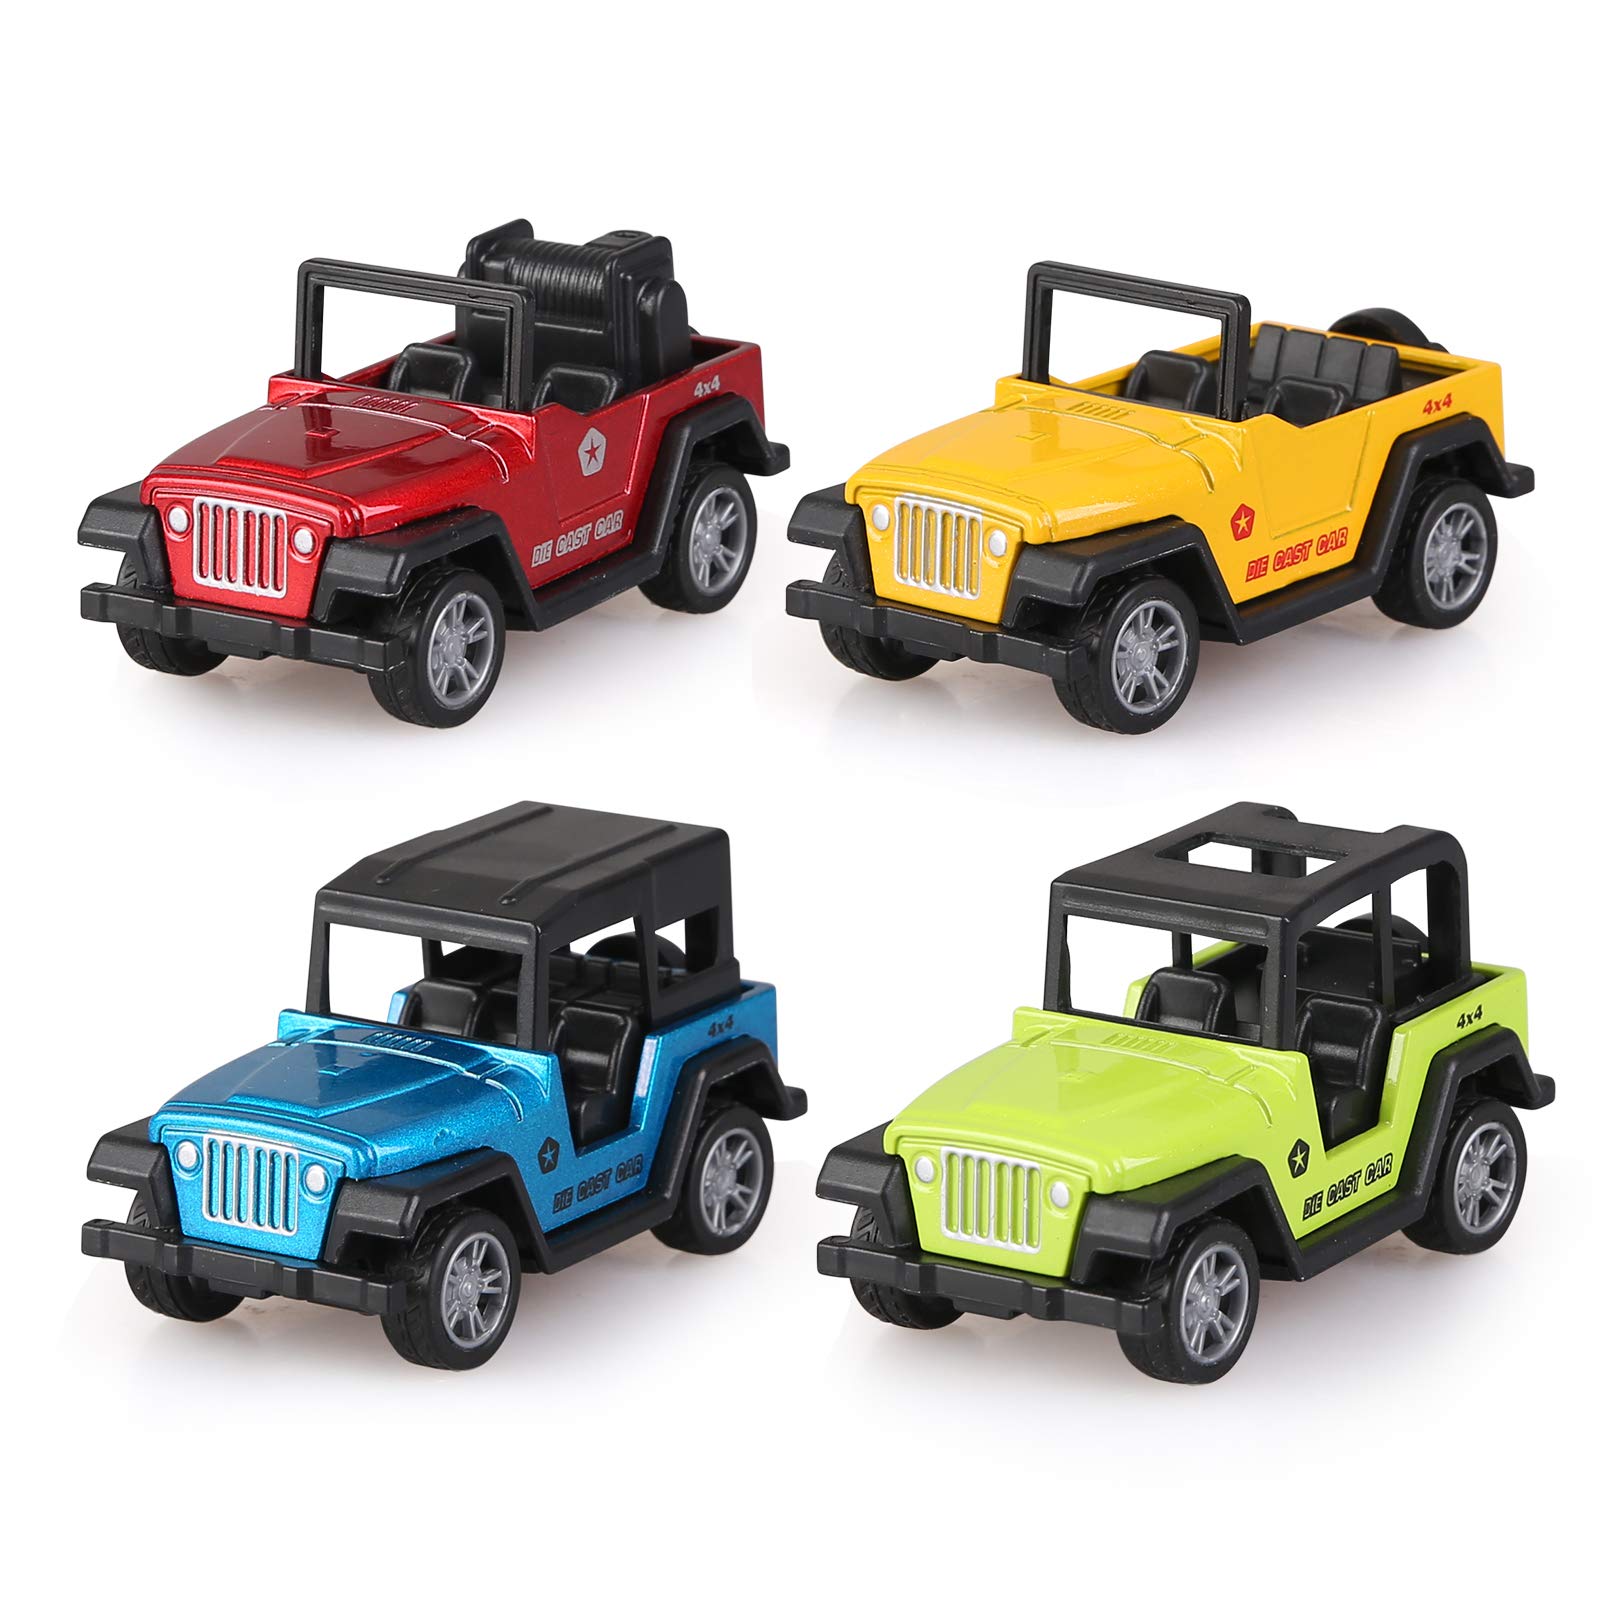 Top Quality Plastic Rocket Toy - Pull Back Vehicles Toys,4 PCS Model Vehicles Toy Gifts for Baby Toddler Boys Girls – Ealing